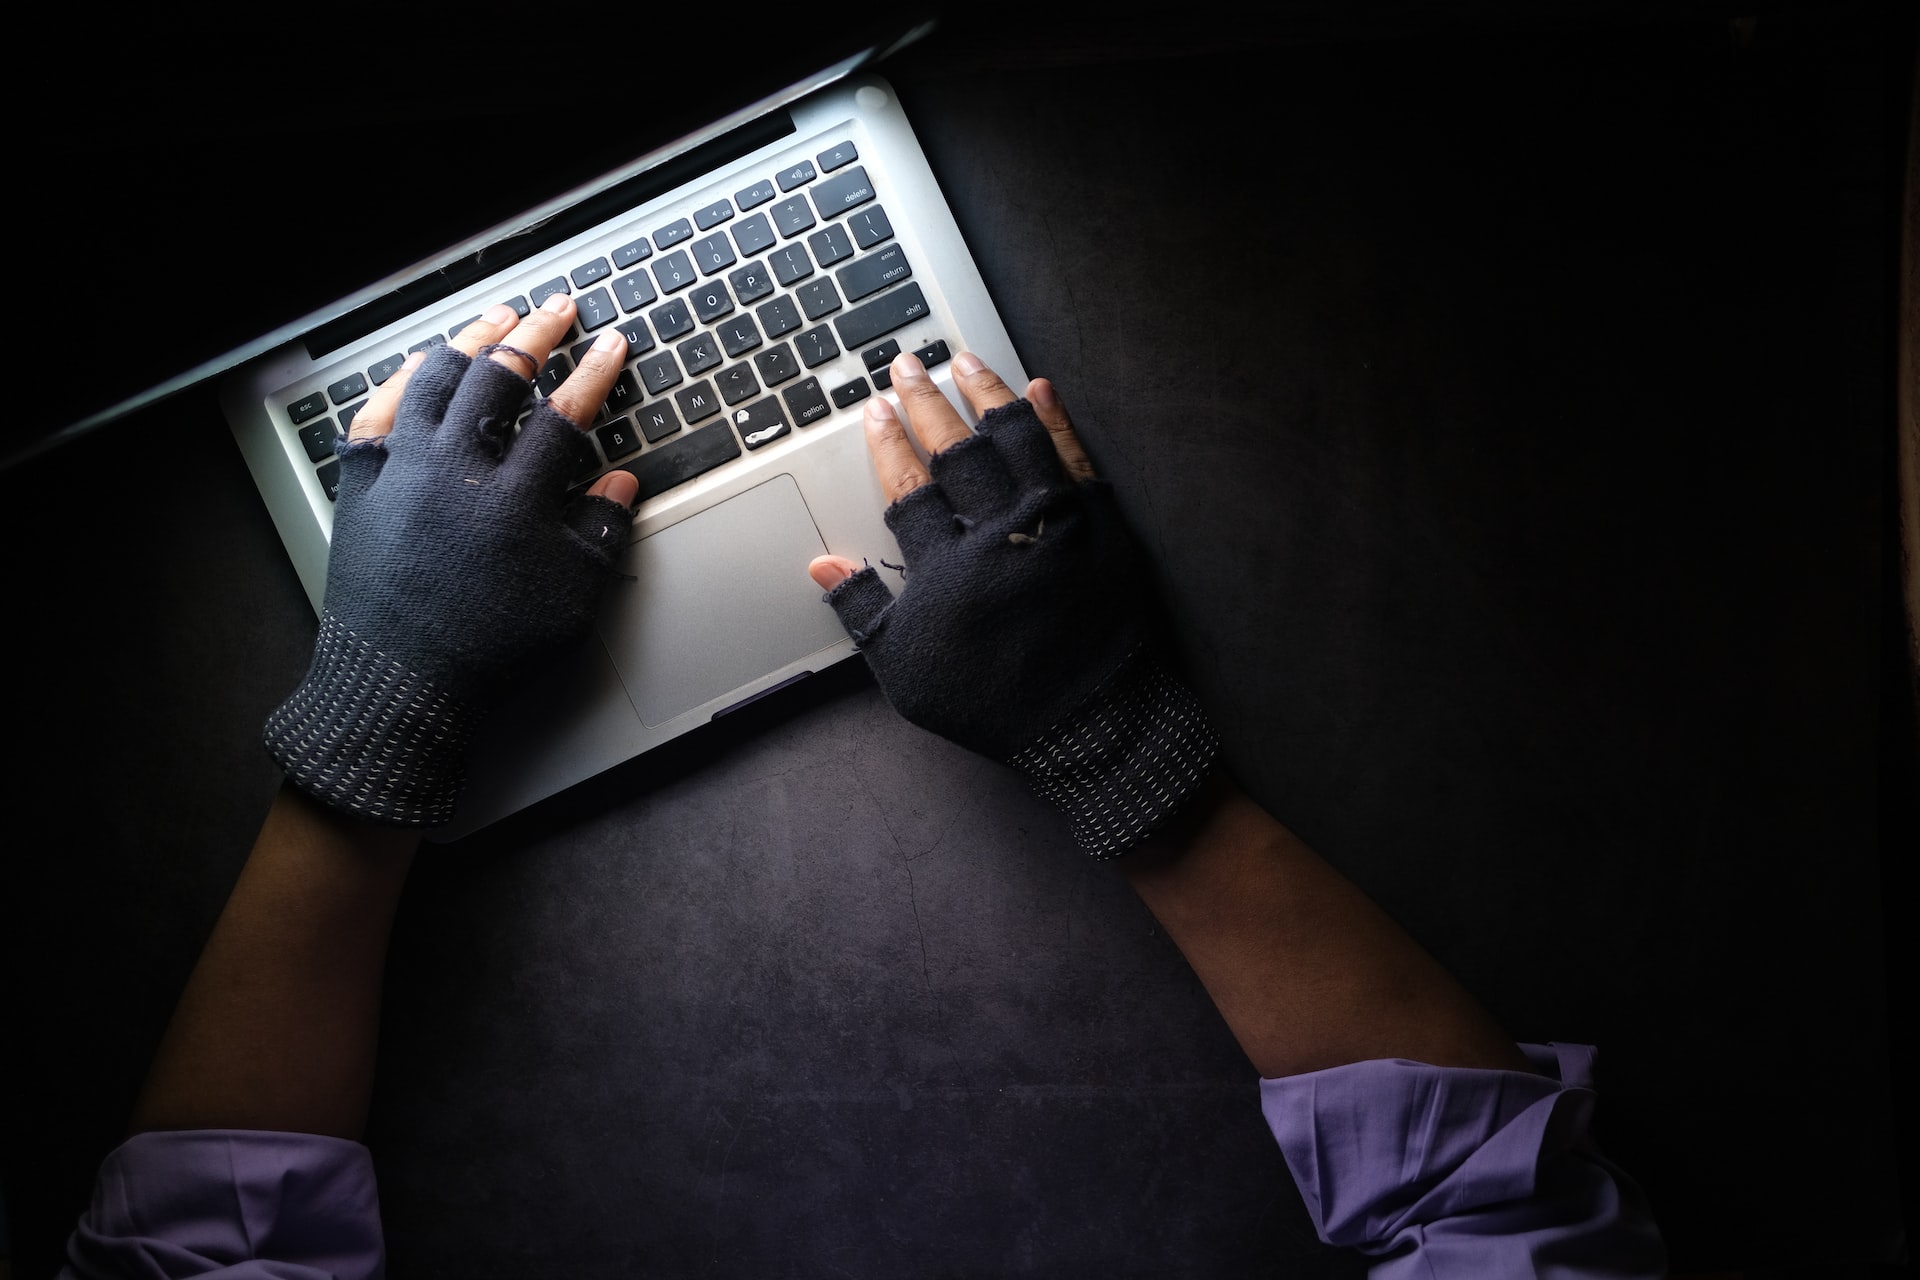 Hands with black gloves typing on a laptop